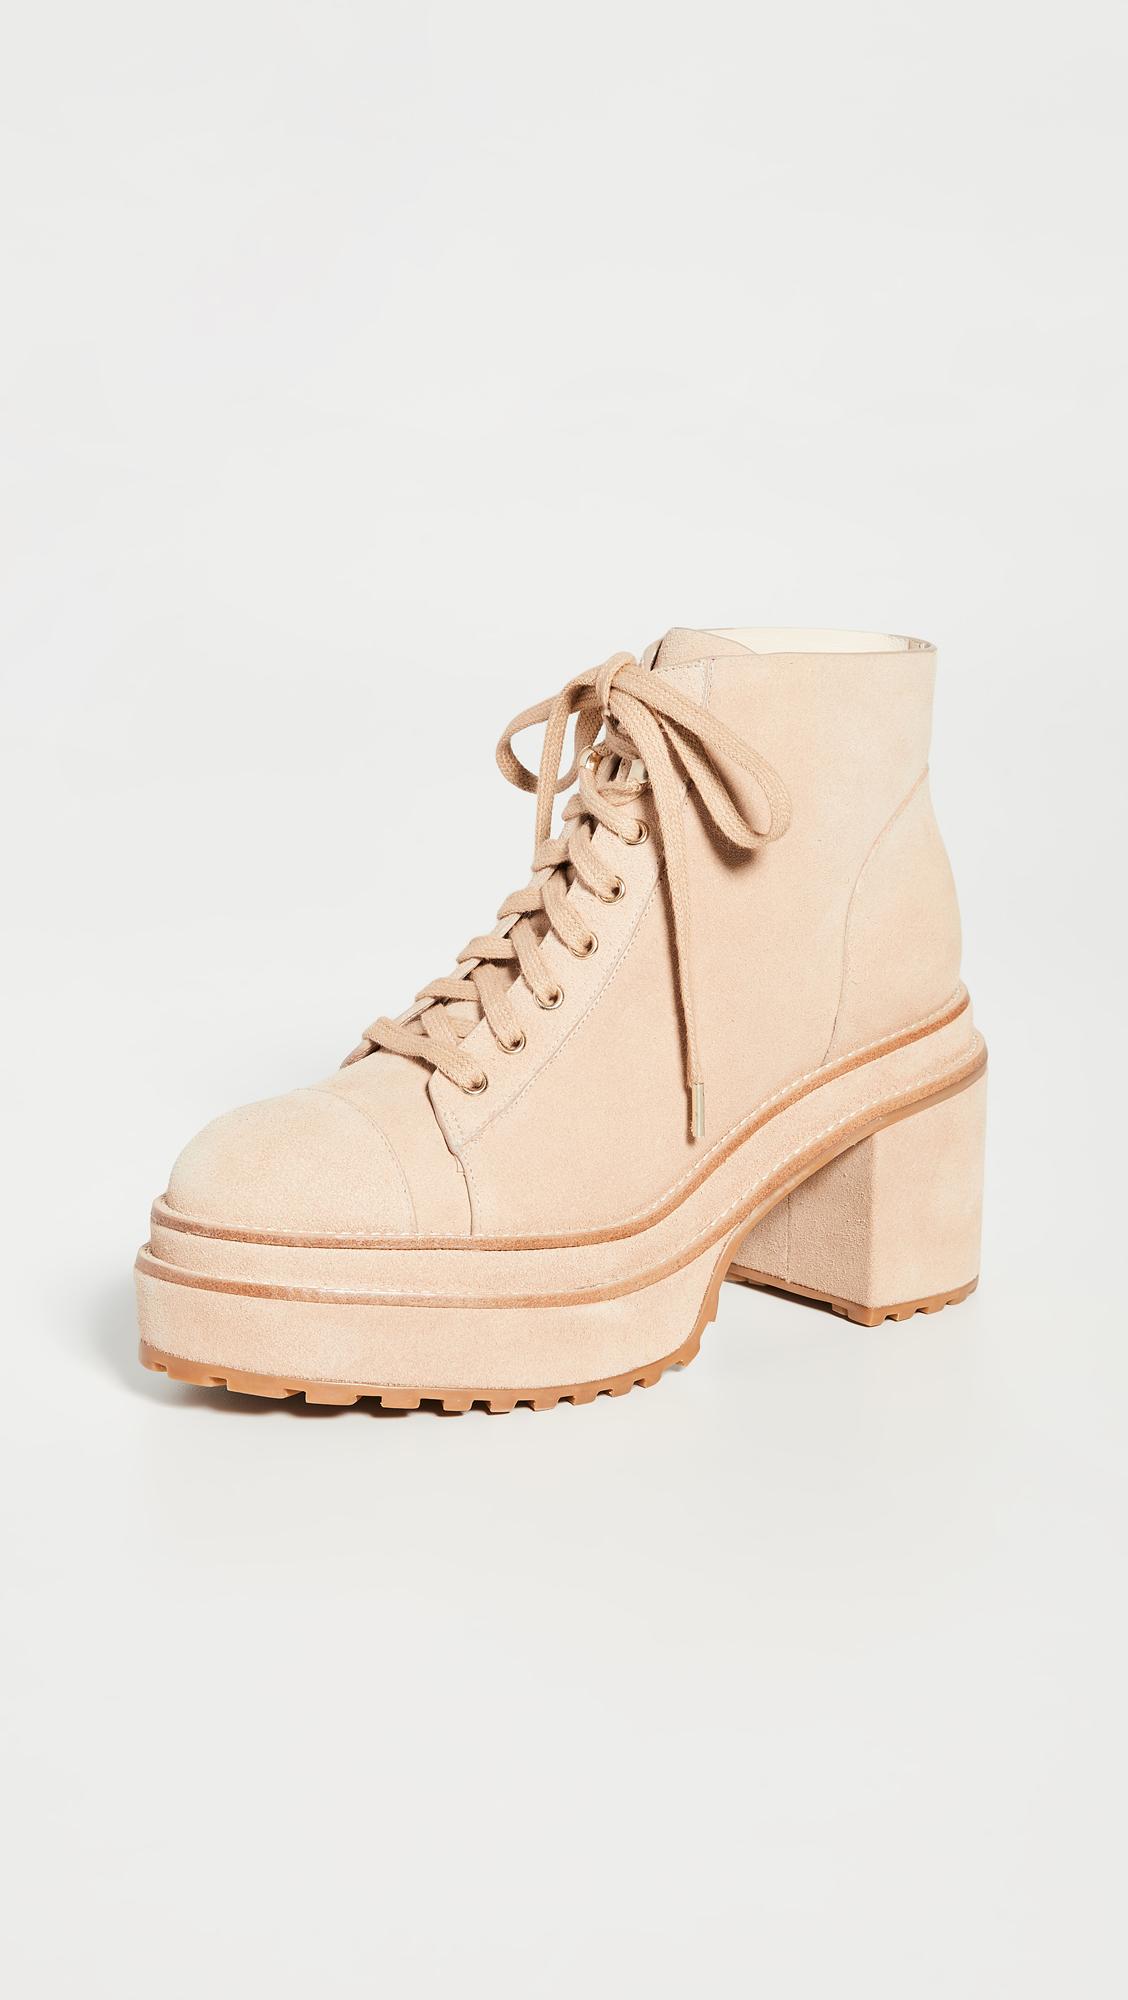 Cult Gaia Leather Bratz Boots in Sand (Natural) Lyst